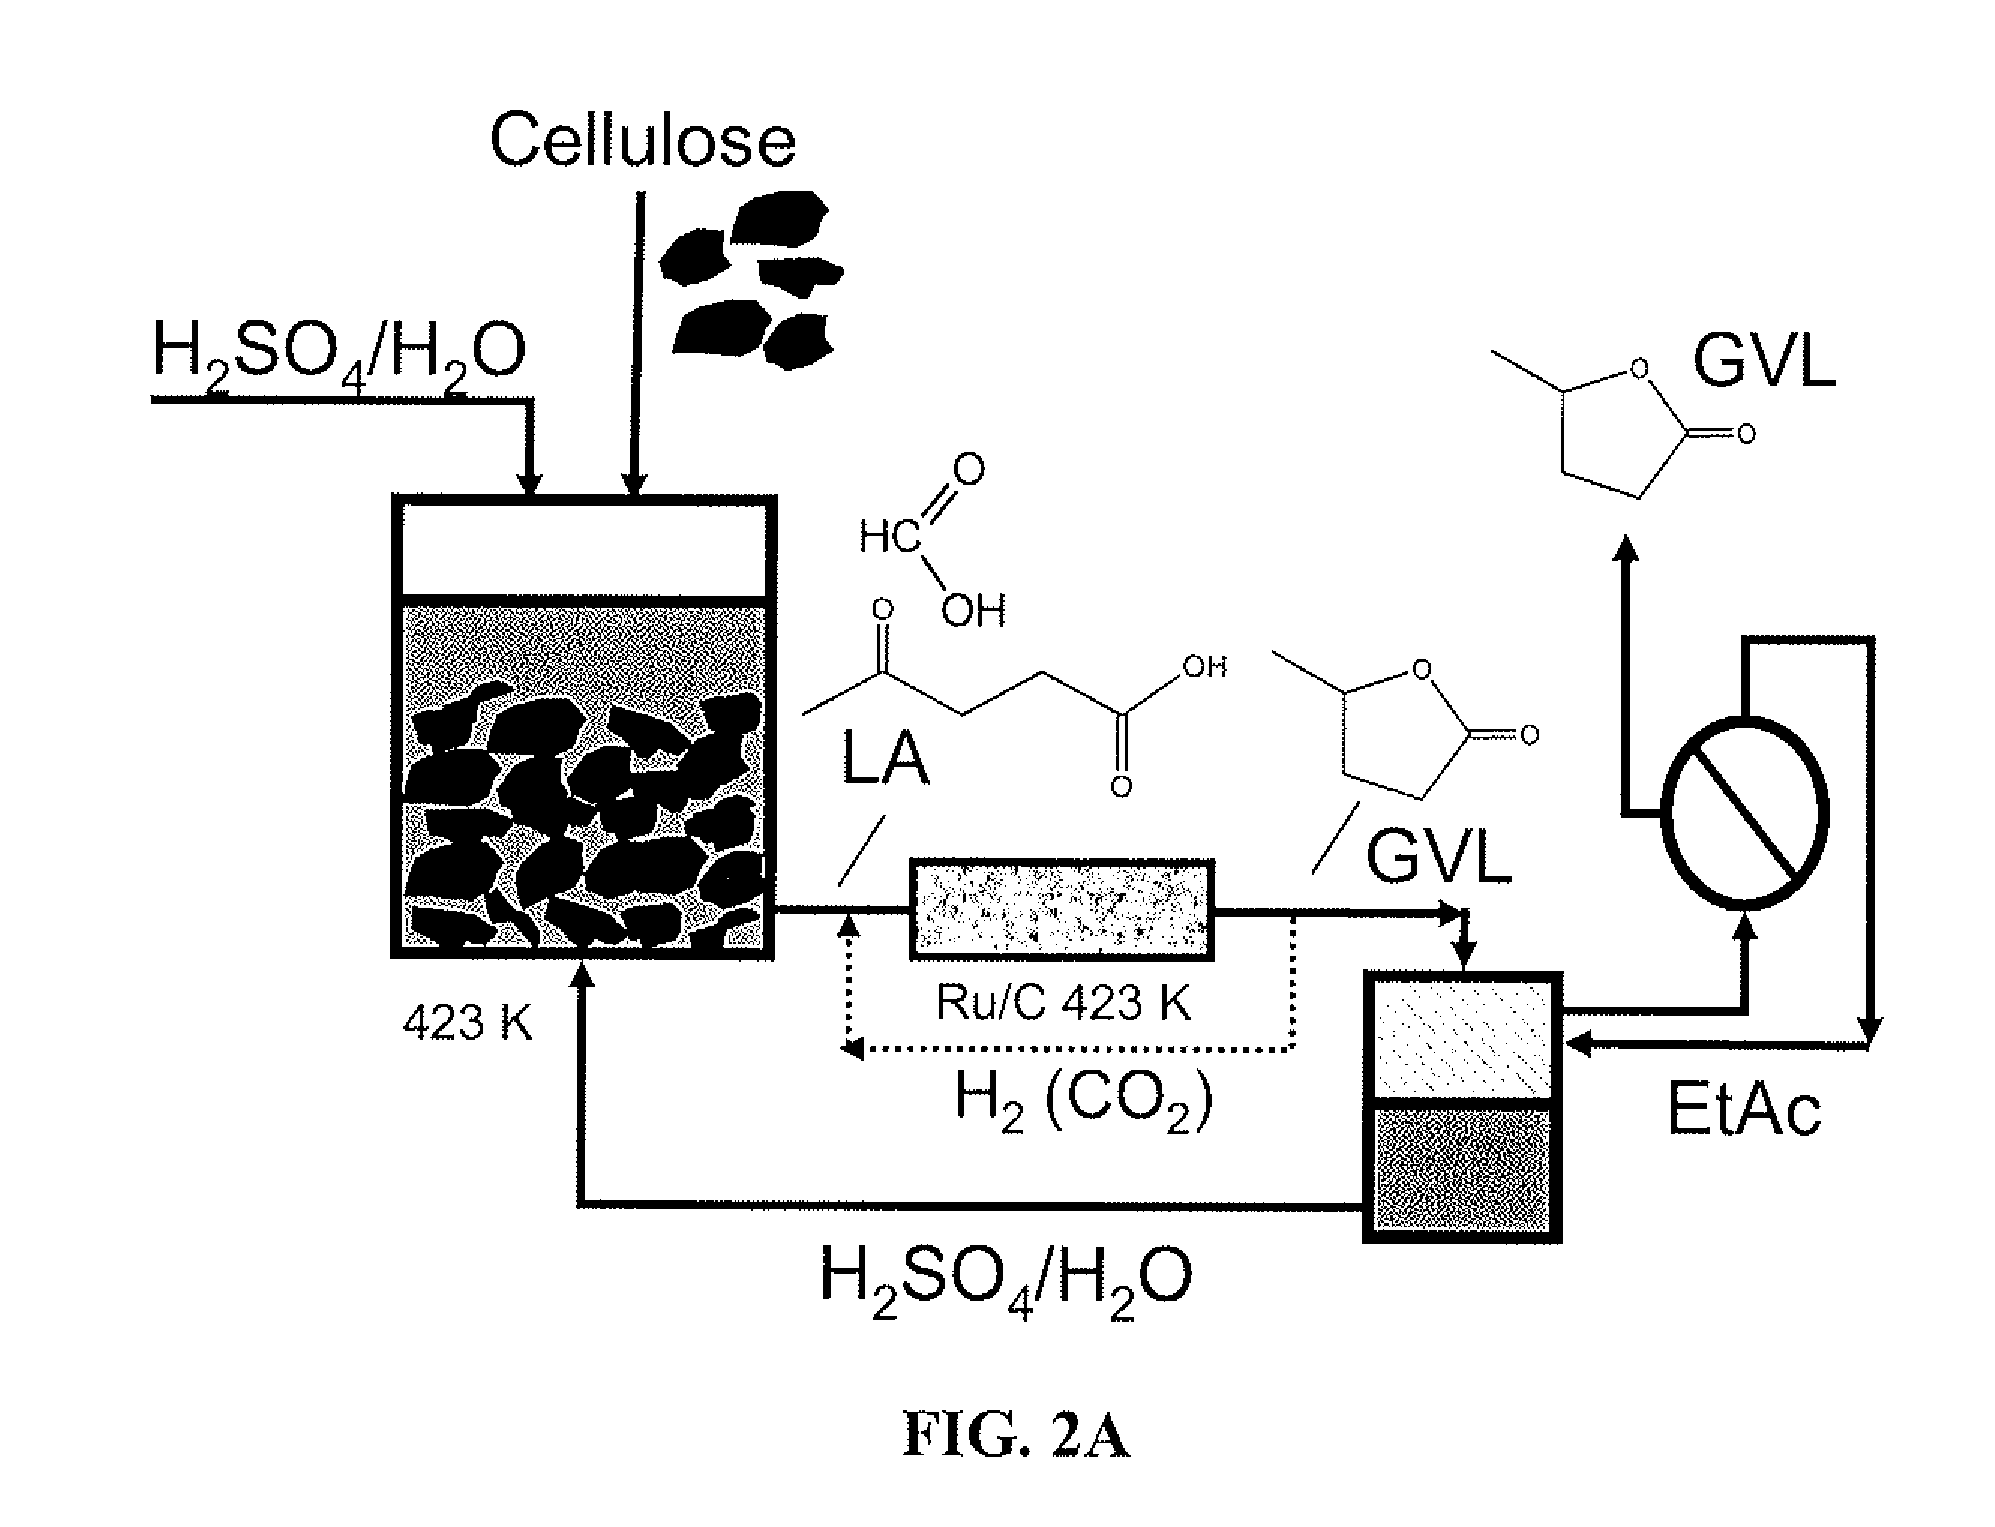 Catalytic conversion of cellulose to liquid hydrocarbon fuels by progressive removal of oxygen to facilitate separation processes and achieve high selectivities